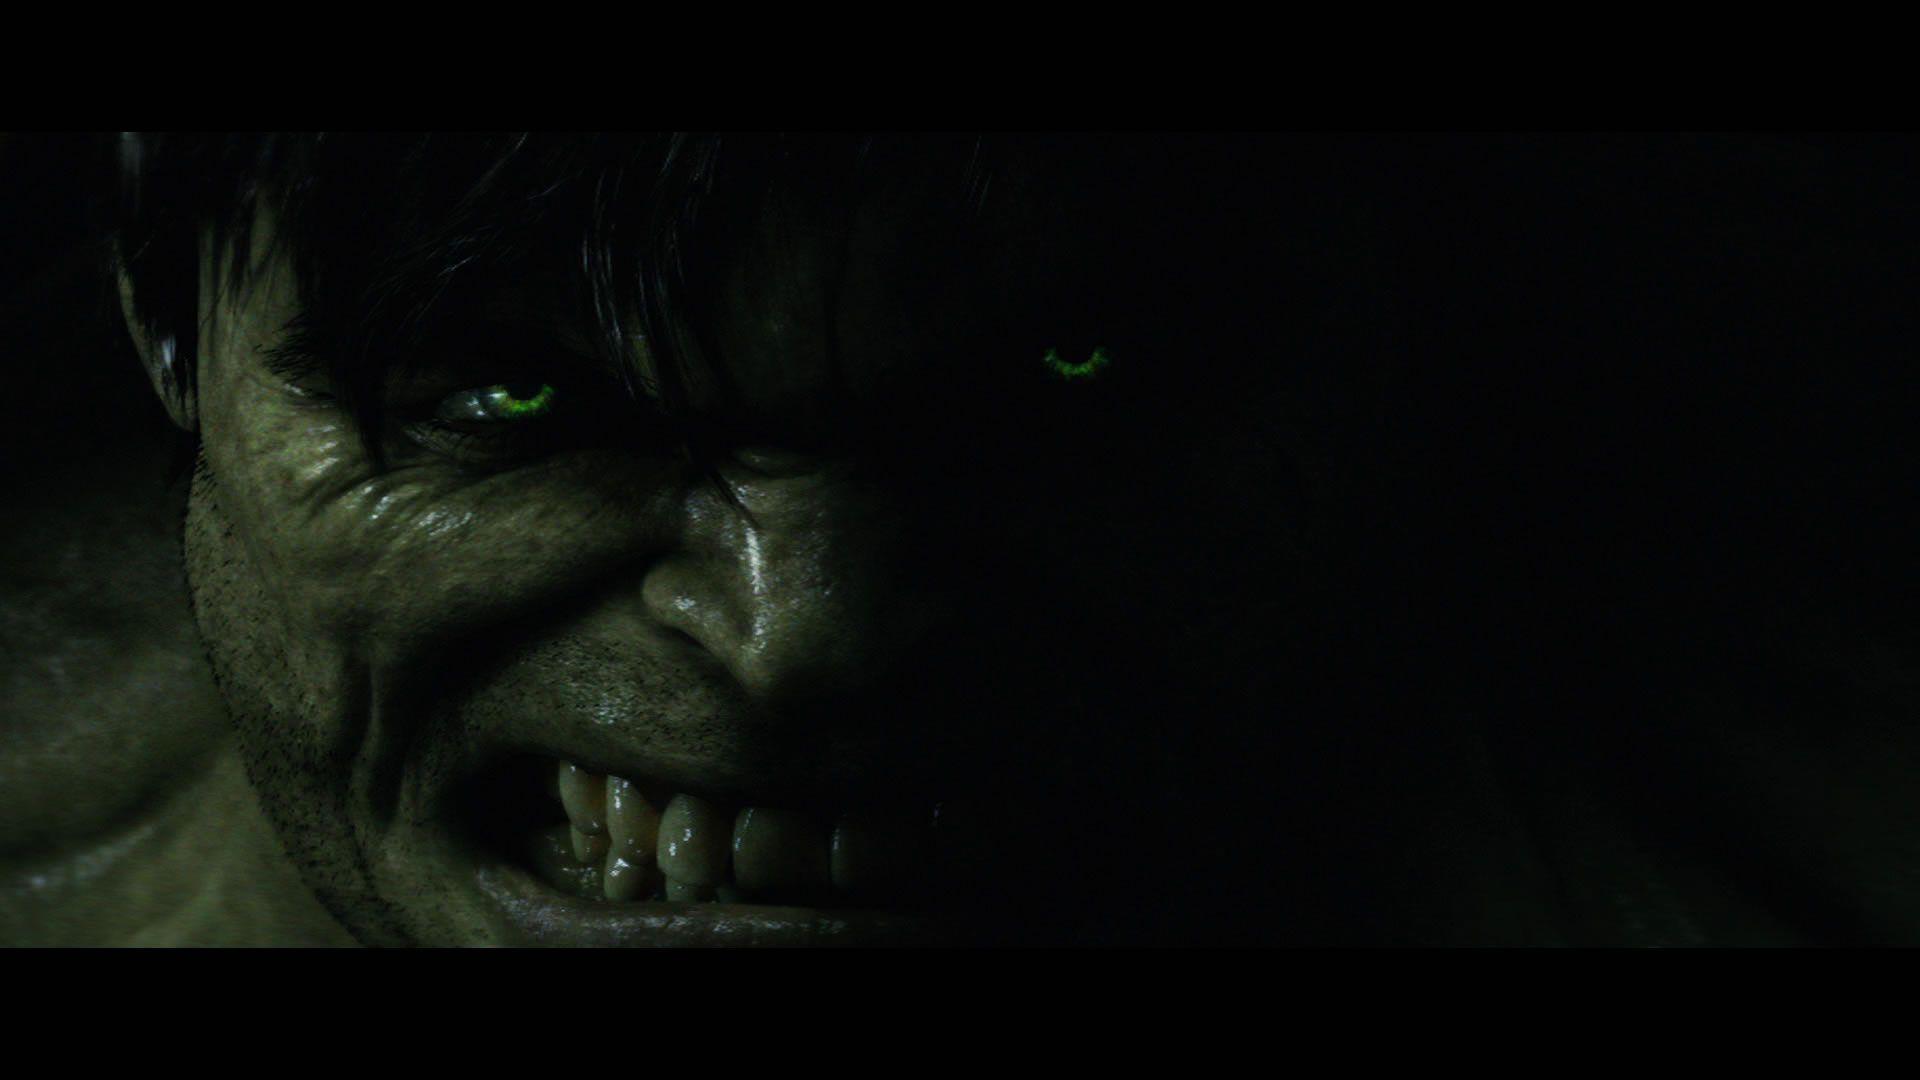 Hulk Face Images Wallpapers